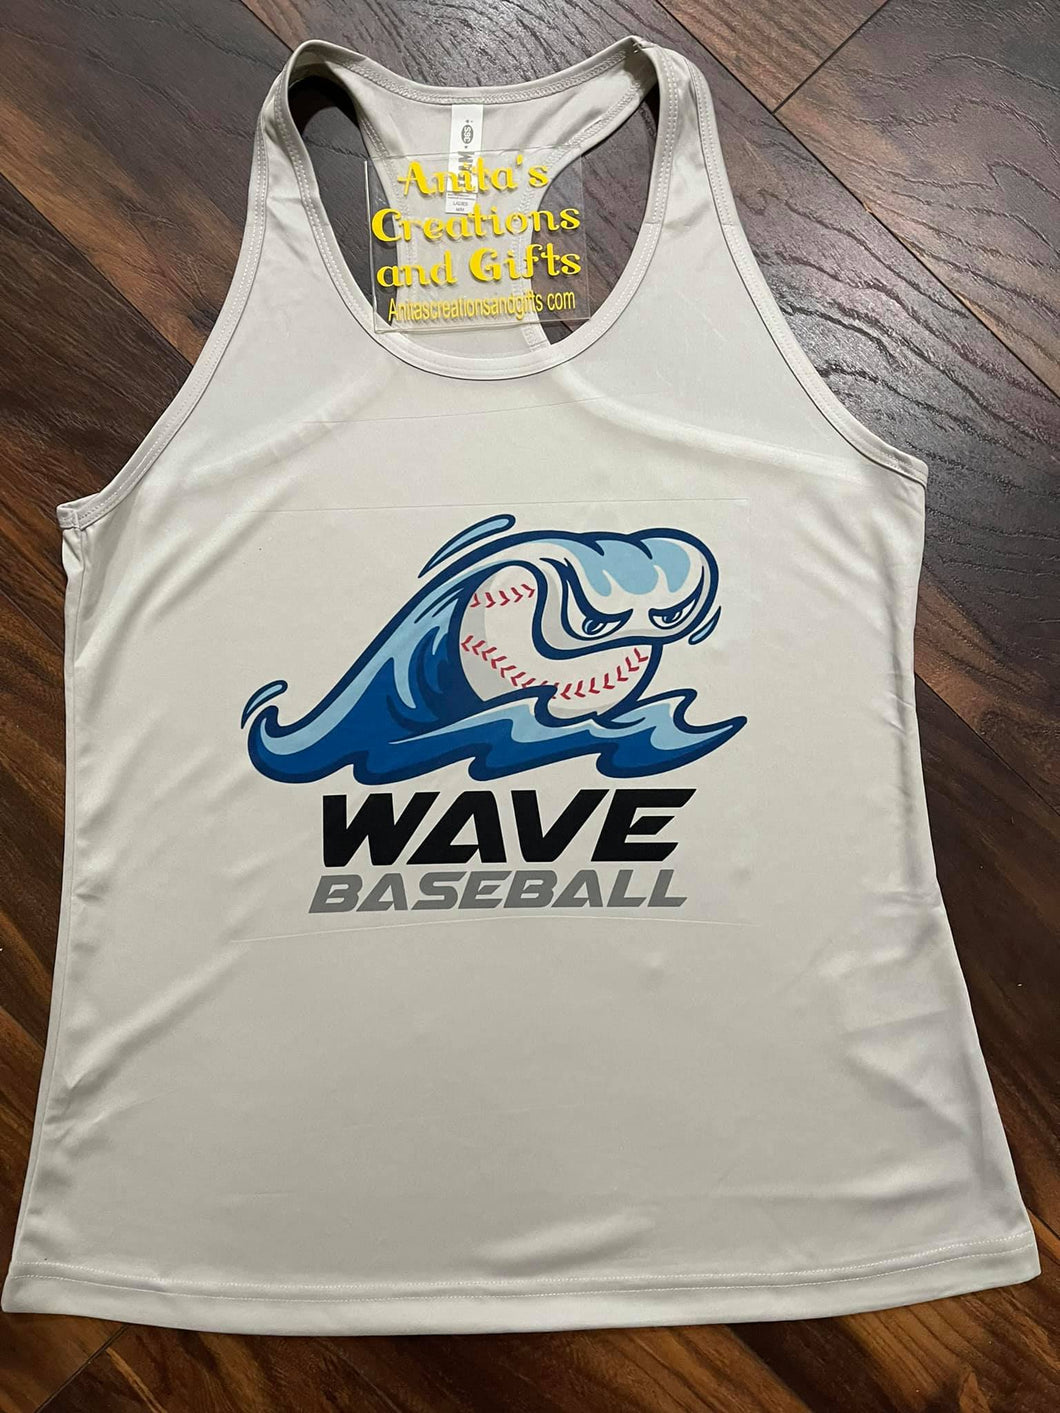 Ladies' Zone Performance Racerback - Wave Baseball - personalize with your team